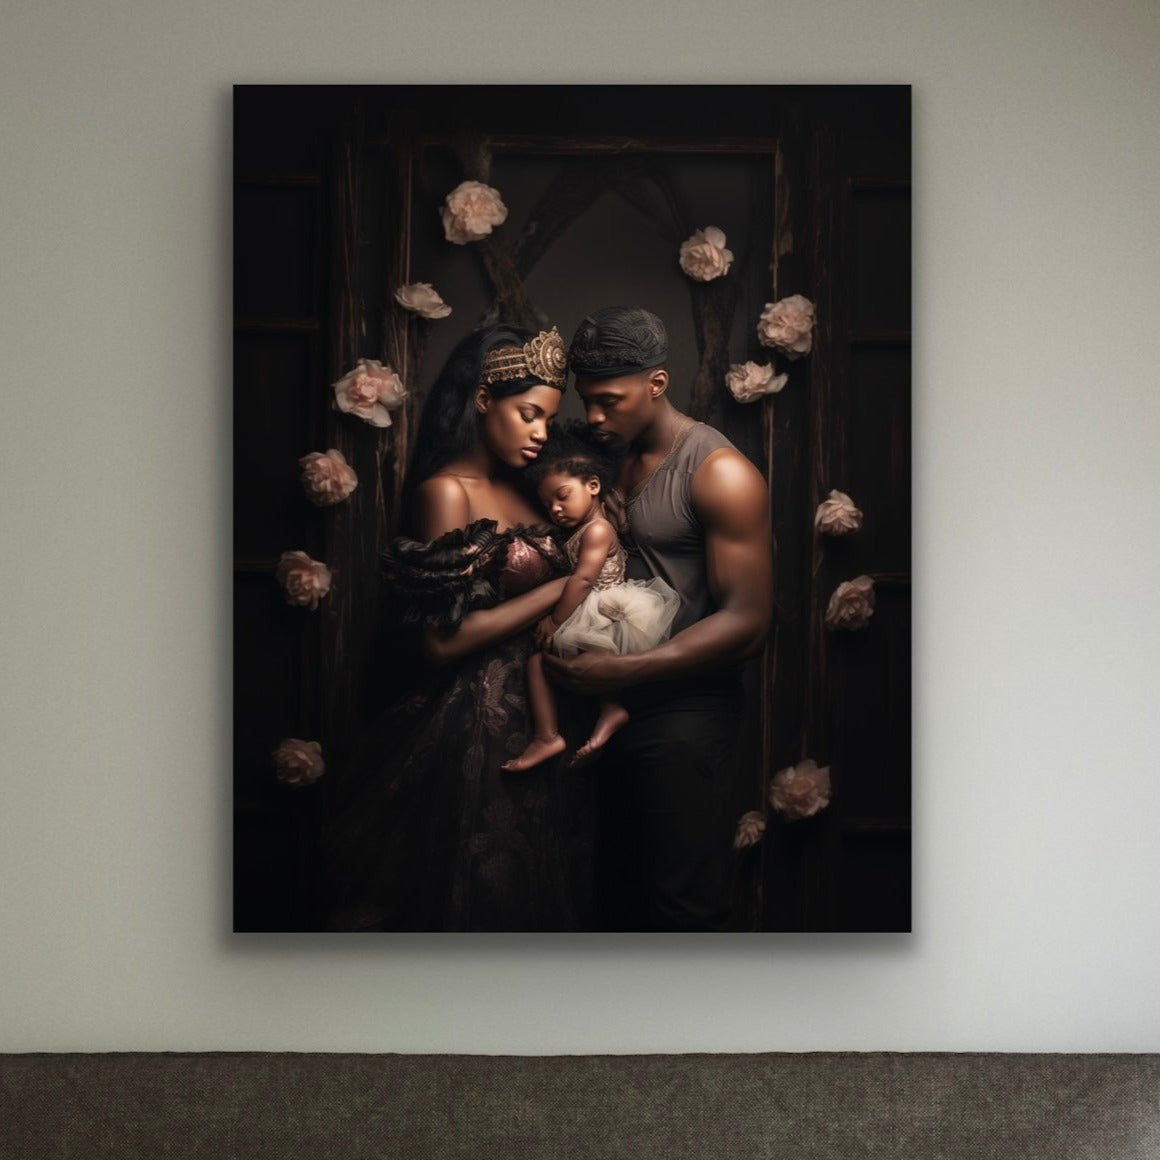 The Family Bond | Stretched Canvas Print Wall Art | Black Art | African American Art | Black Love